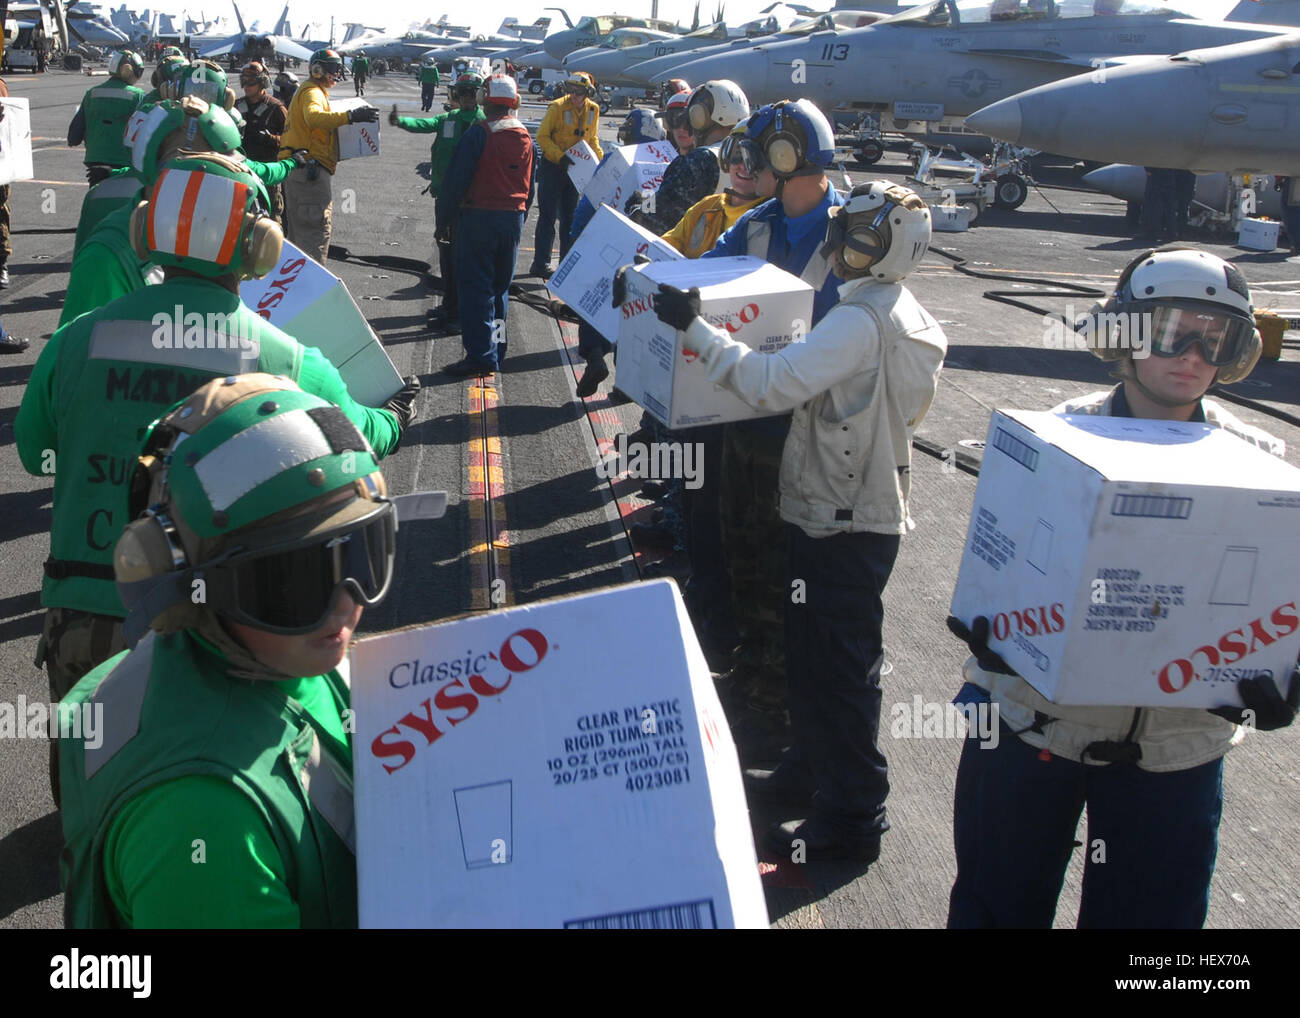 Sailors assigned to the aircraft carrier USS Ronald Reagan and embarked Carrier Air Wing 14 take boxes off of a C-2A Greyhound from Fleet Logistics Combat Support Squadron 30.  Ronald Reagan was diverted from its current training maneuvers at the direction of Commander U.S. Third Fleet, and at the request of the U.S. Coast Guard, to a position south near the Carnival cruise ship C/V Splendor to facilitate the delivery of 4,500 pounds of supplies to the cruise ship. Early Monday, CV Splendor reported it was dead in the water 150 nautical miles southwest of San Diego. (U.S. Navy photo by Seaman  Stock Photo